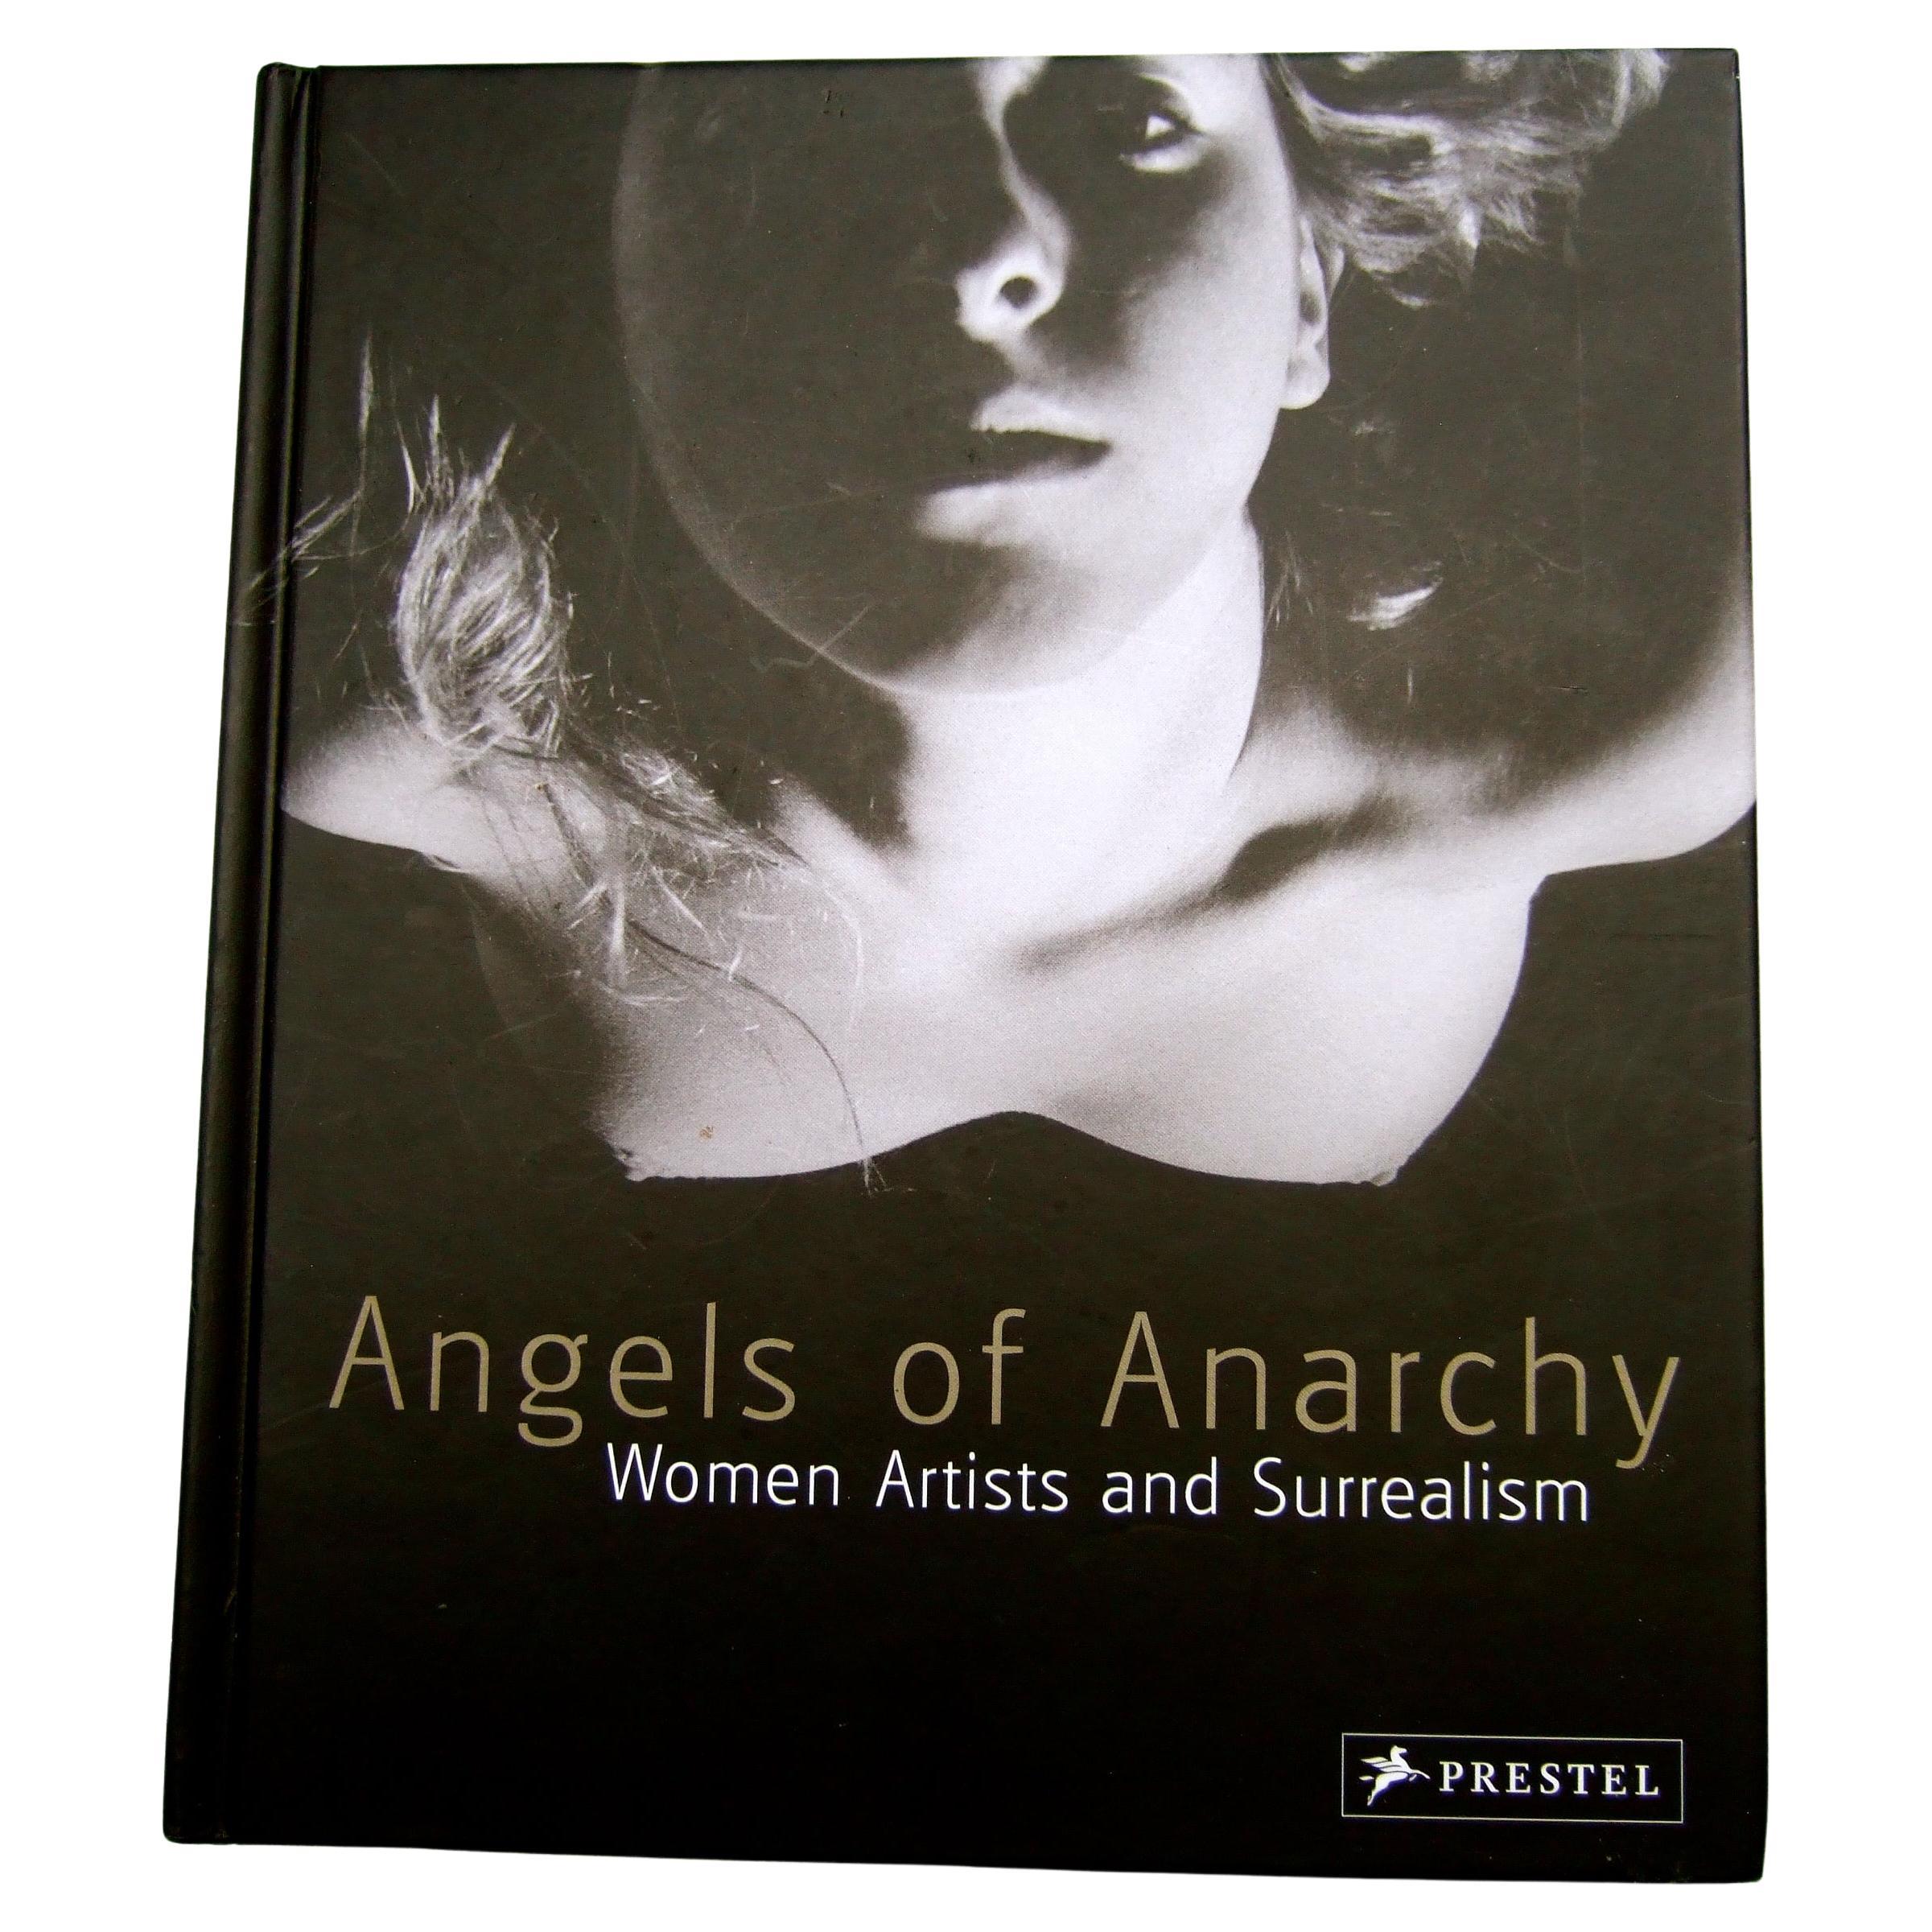 Angels of Anarchy Rare Women Artist & Surrealism Hard Cover Book  c 2009 For Sale